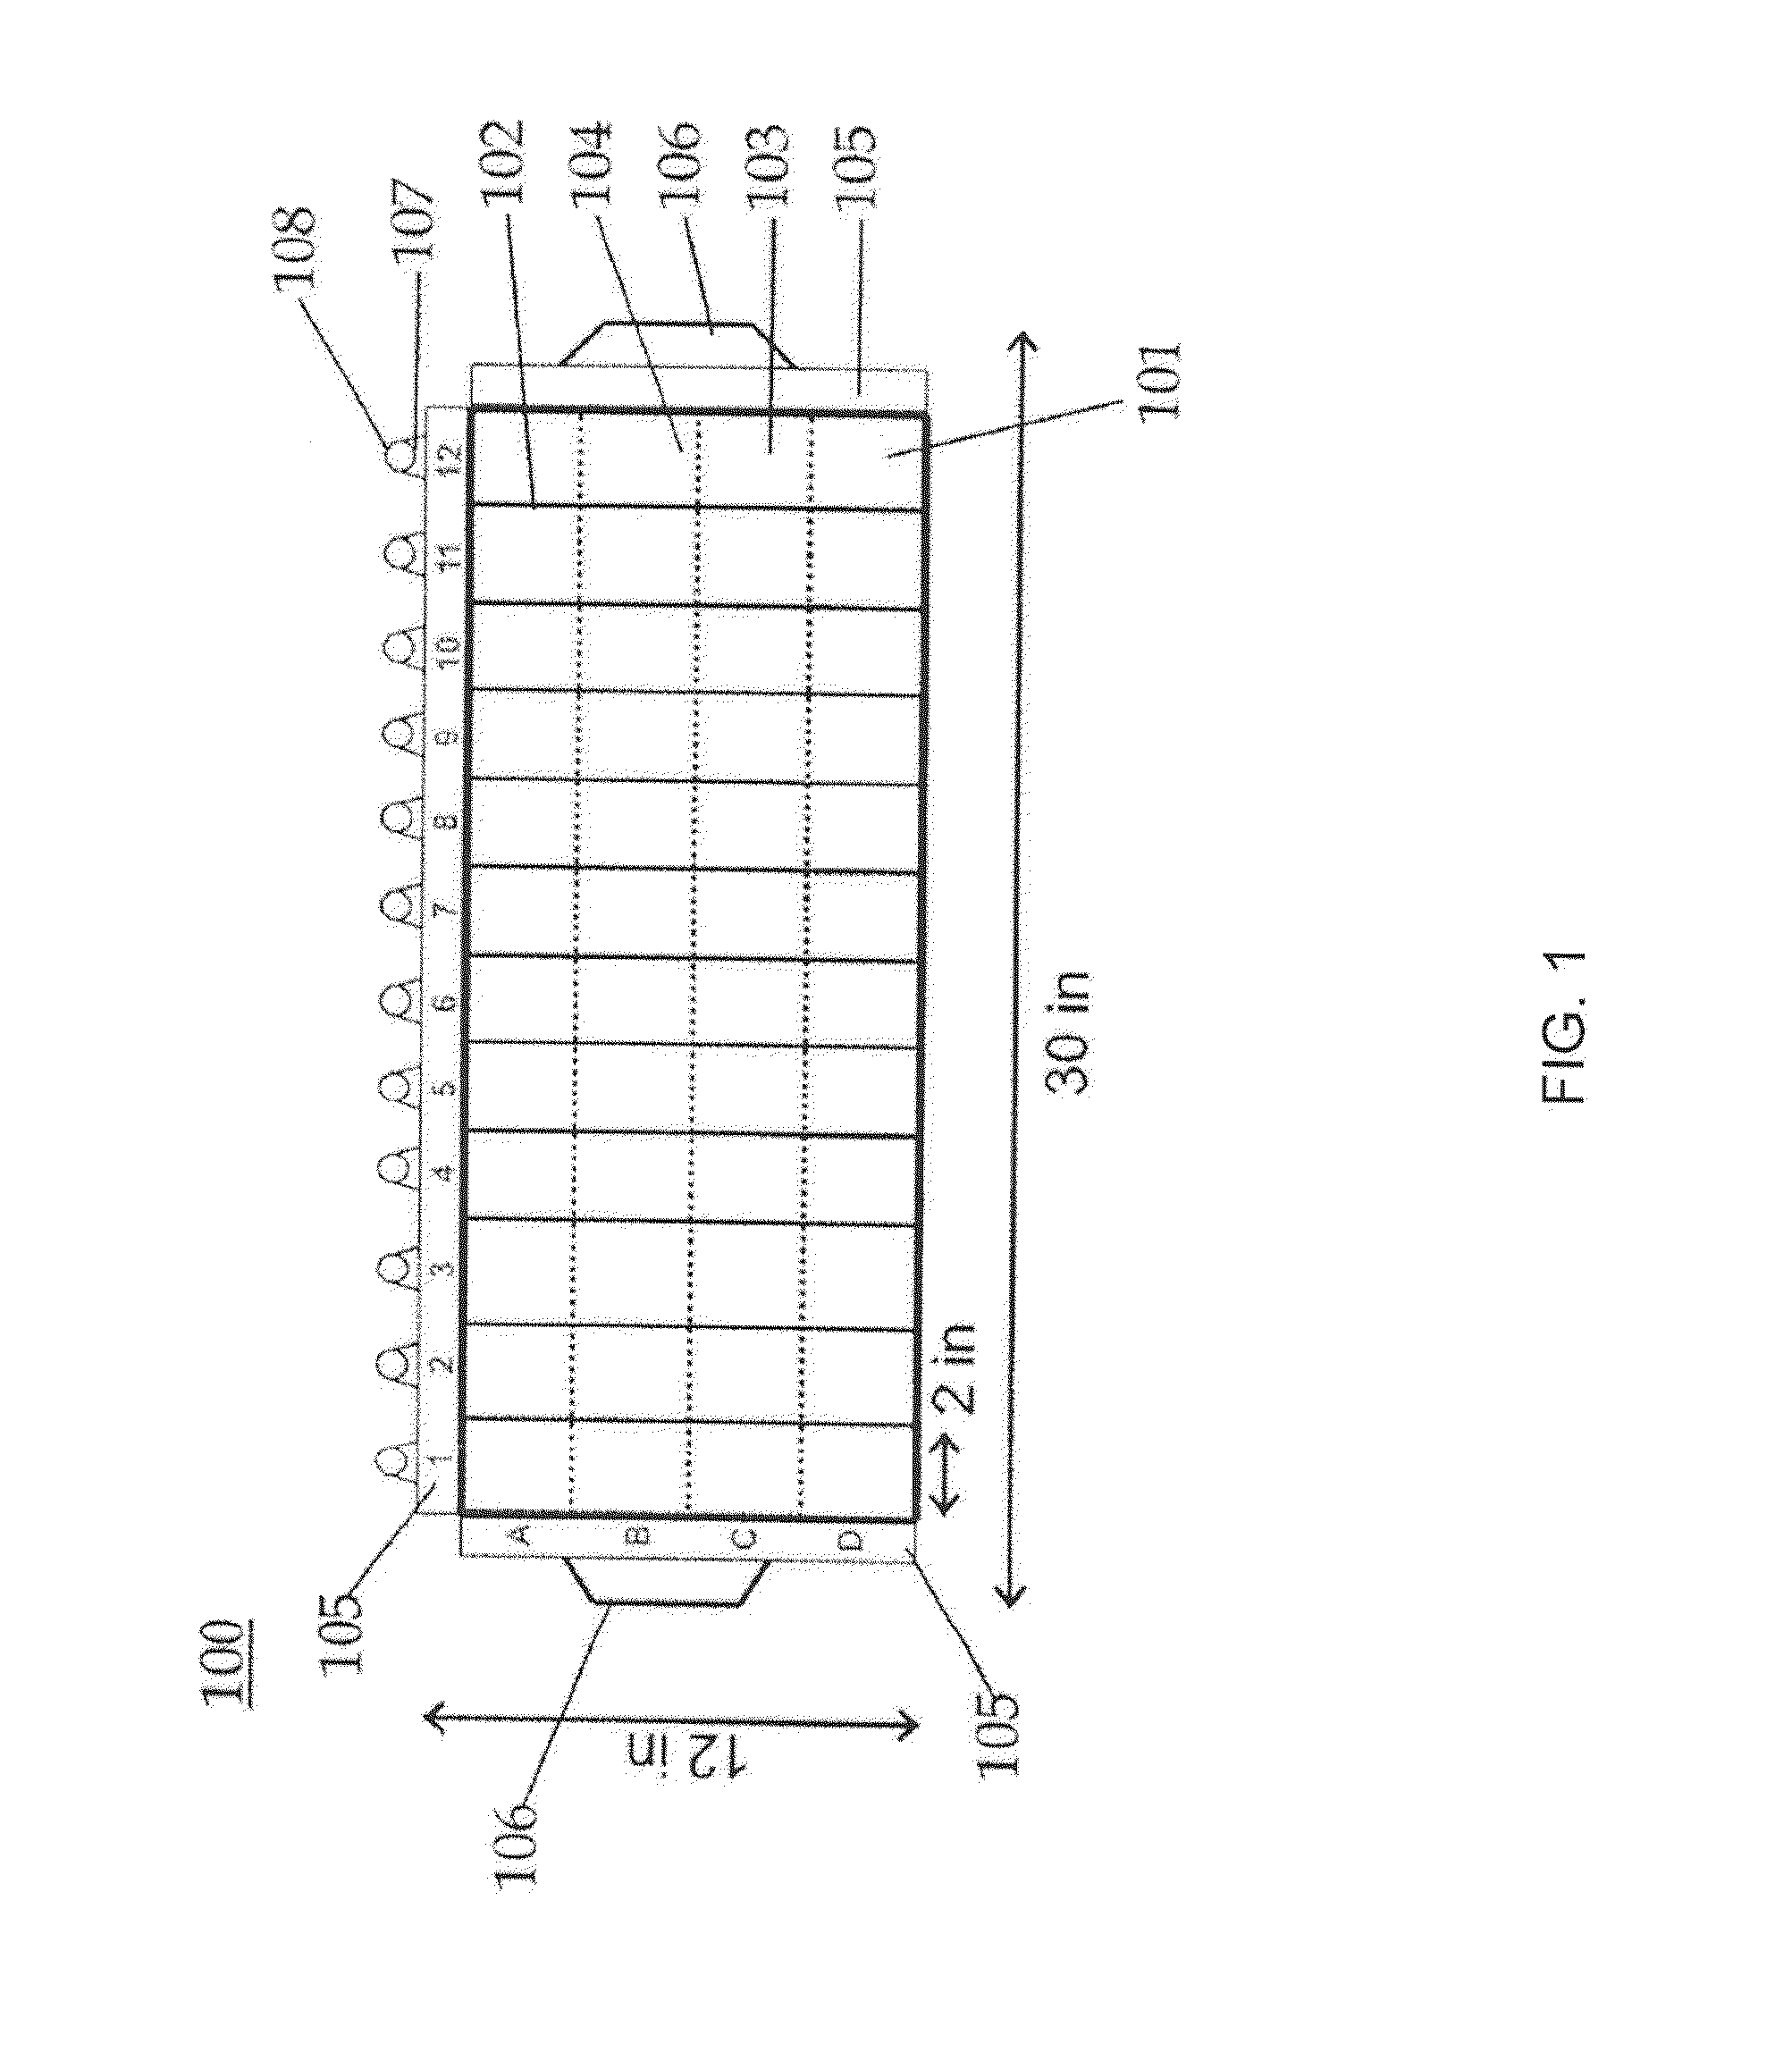 System and apparatus for research and testing of small aquatic species